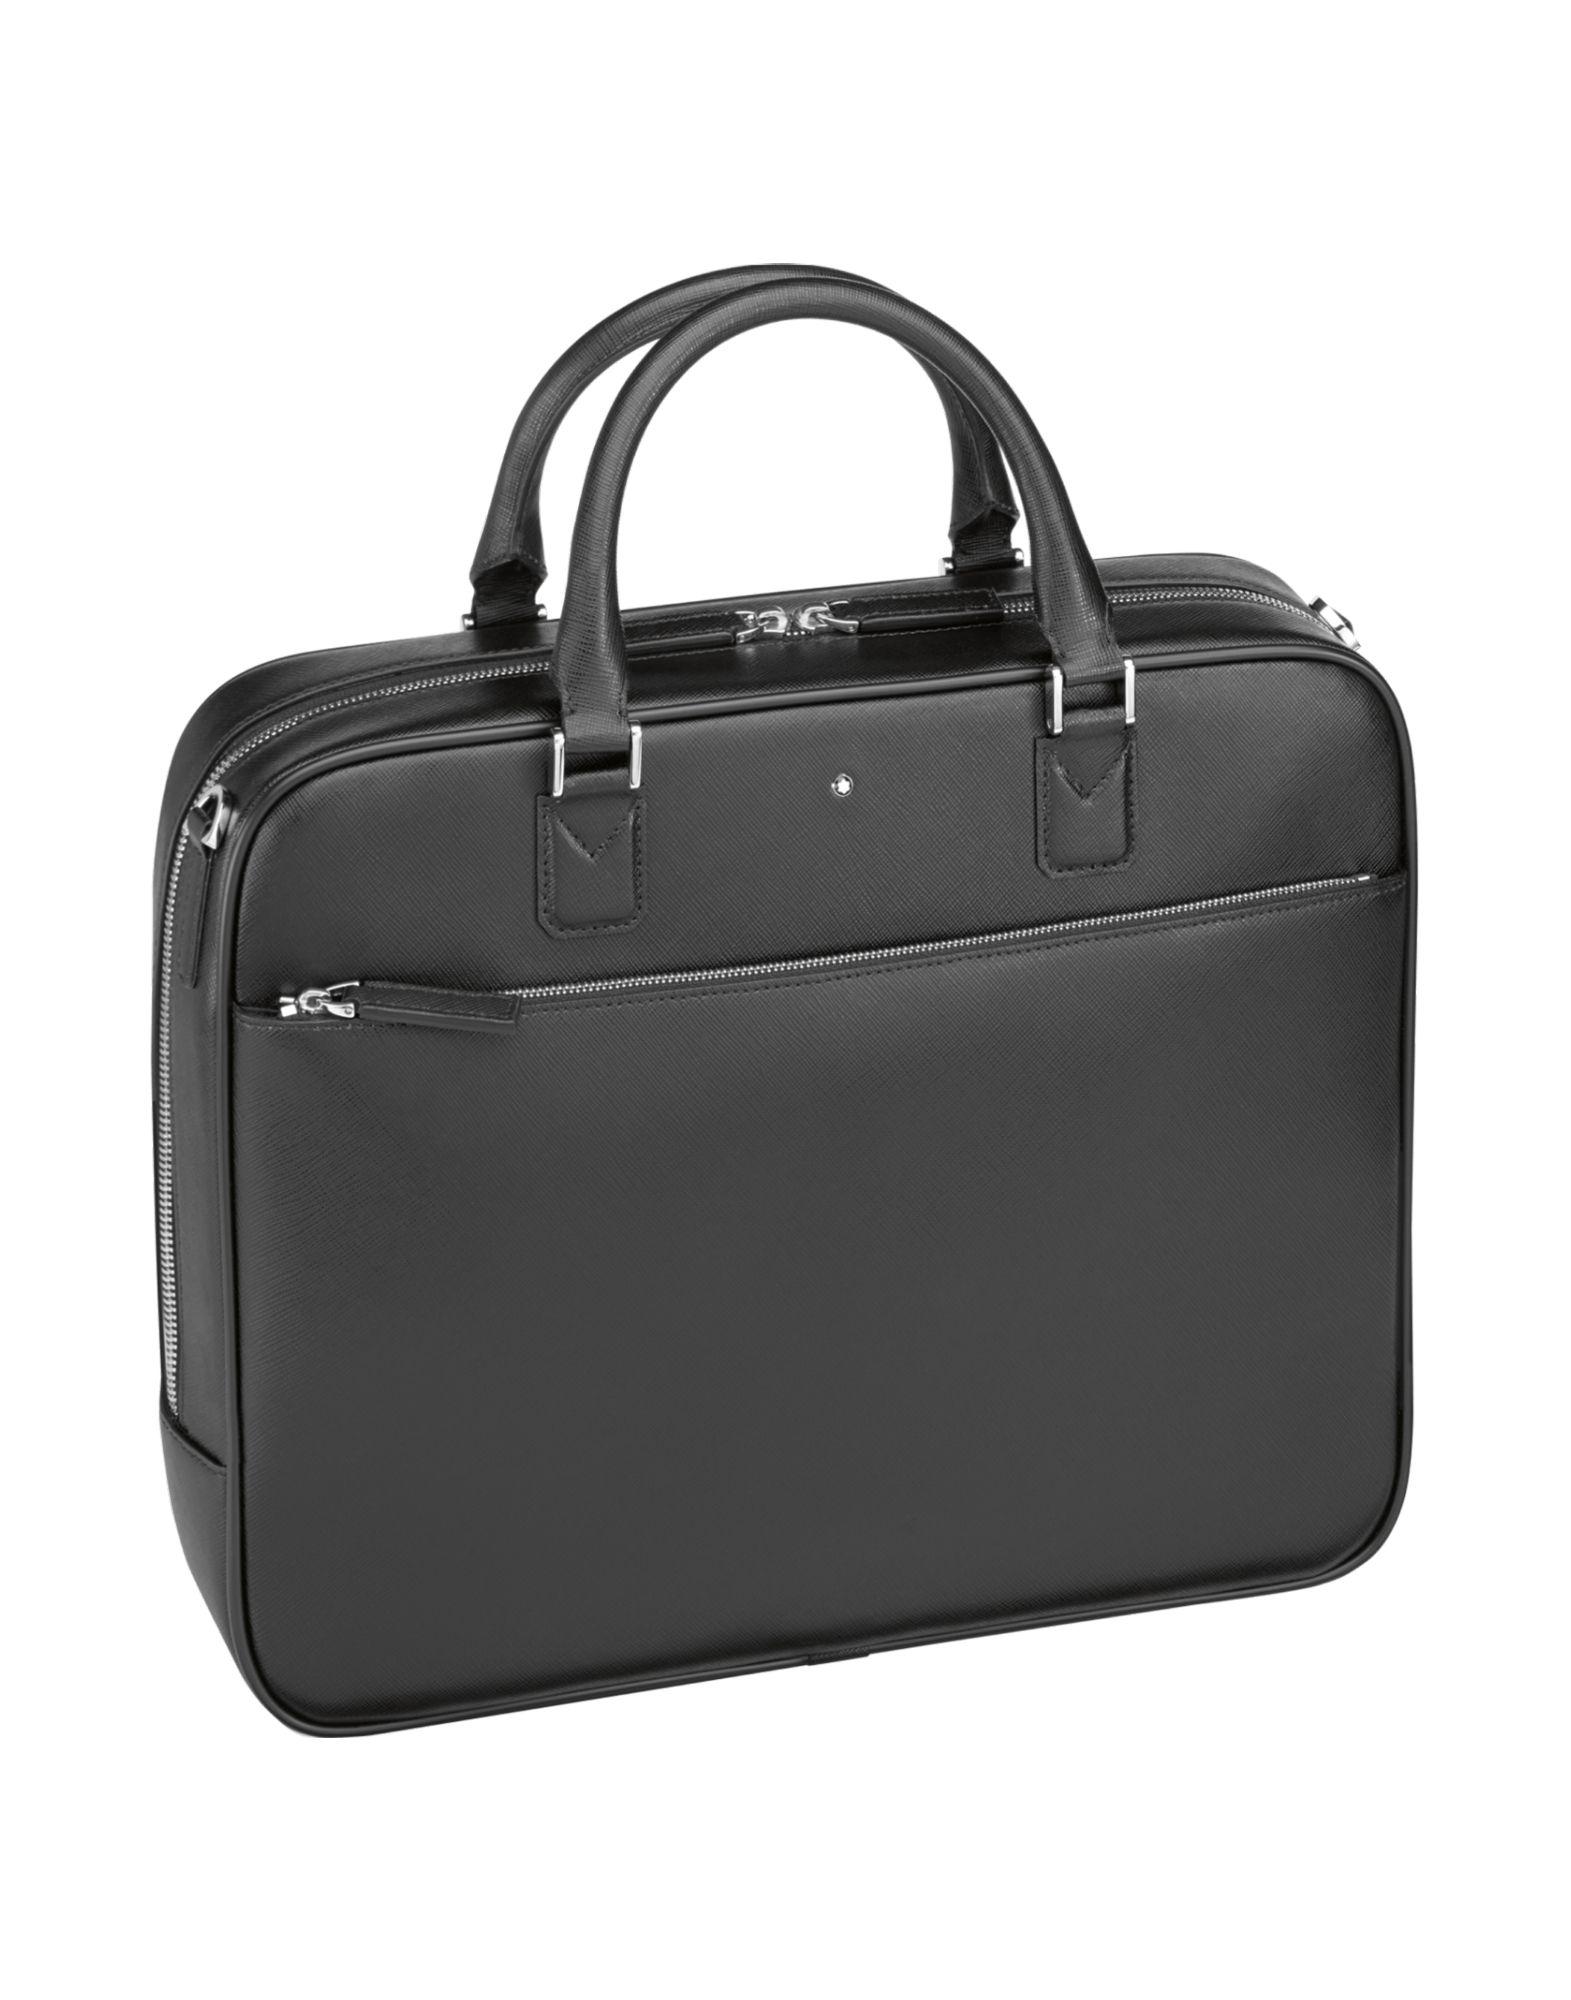 Montblanc Leather Work Bags in Black for Men - Lyst